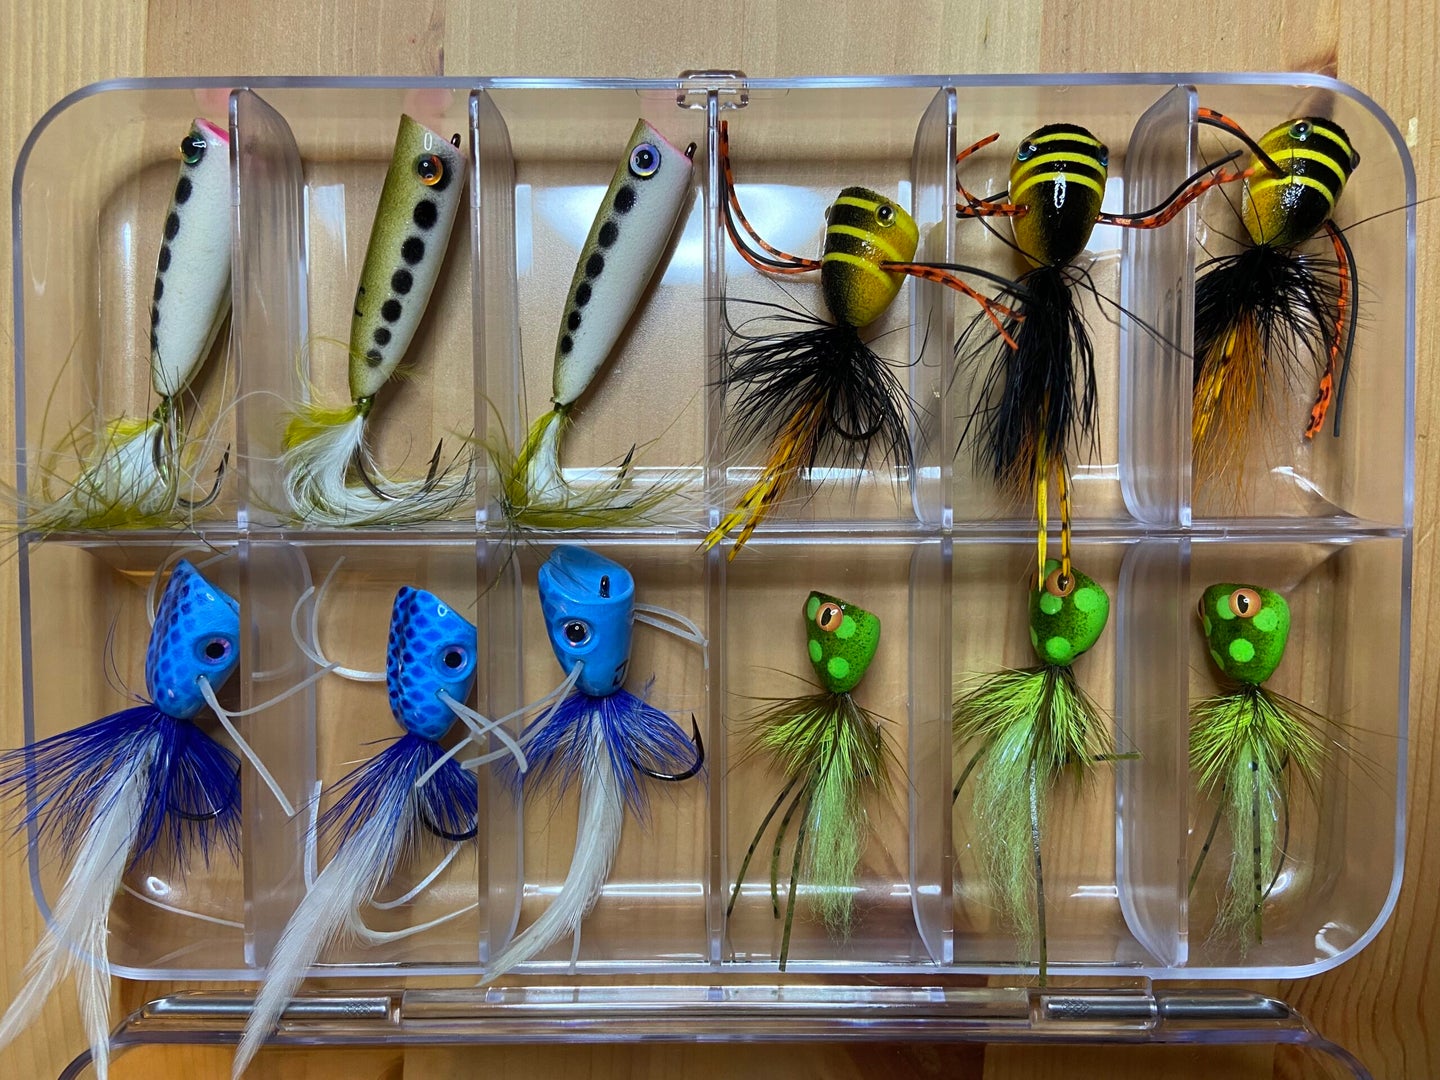 An assortment of colorful bass popper-style lures in a clear plastic tray